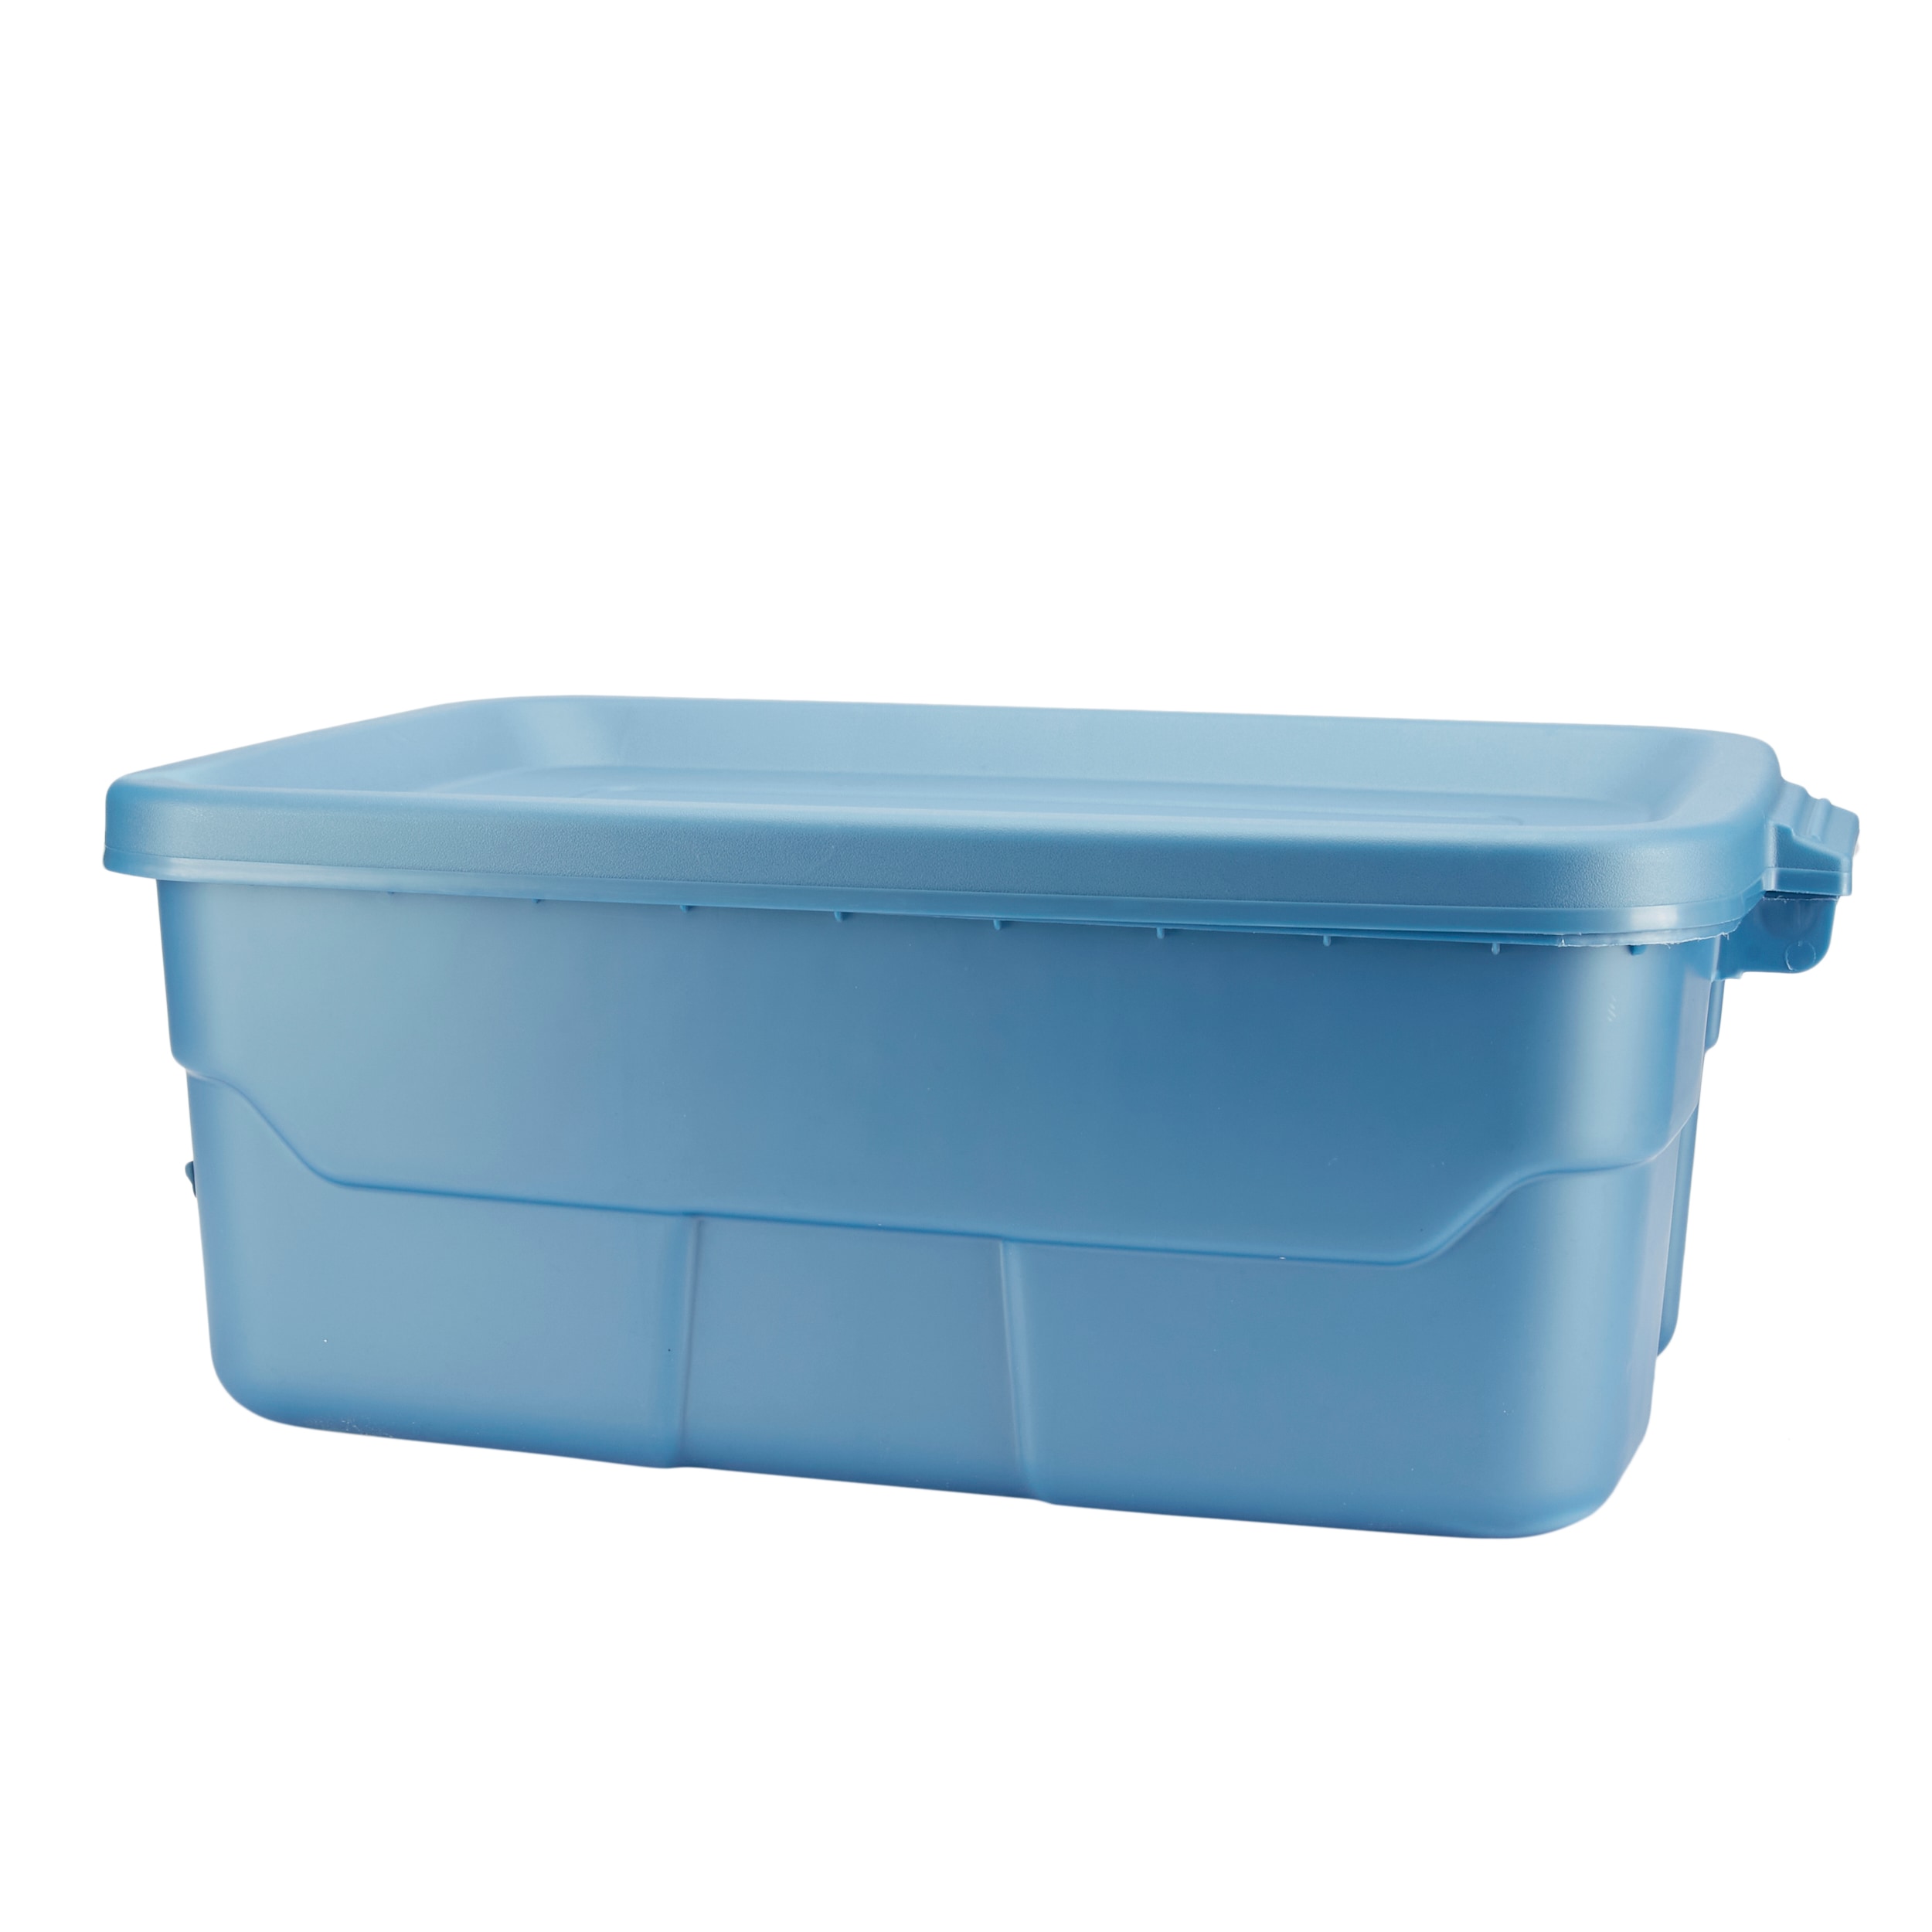 Teacher Created Resources Slate Blue Small Plastic Storage Bin, Pack of 6 -  Bed Bath & Beyond - 39180762